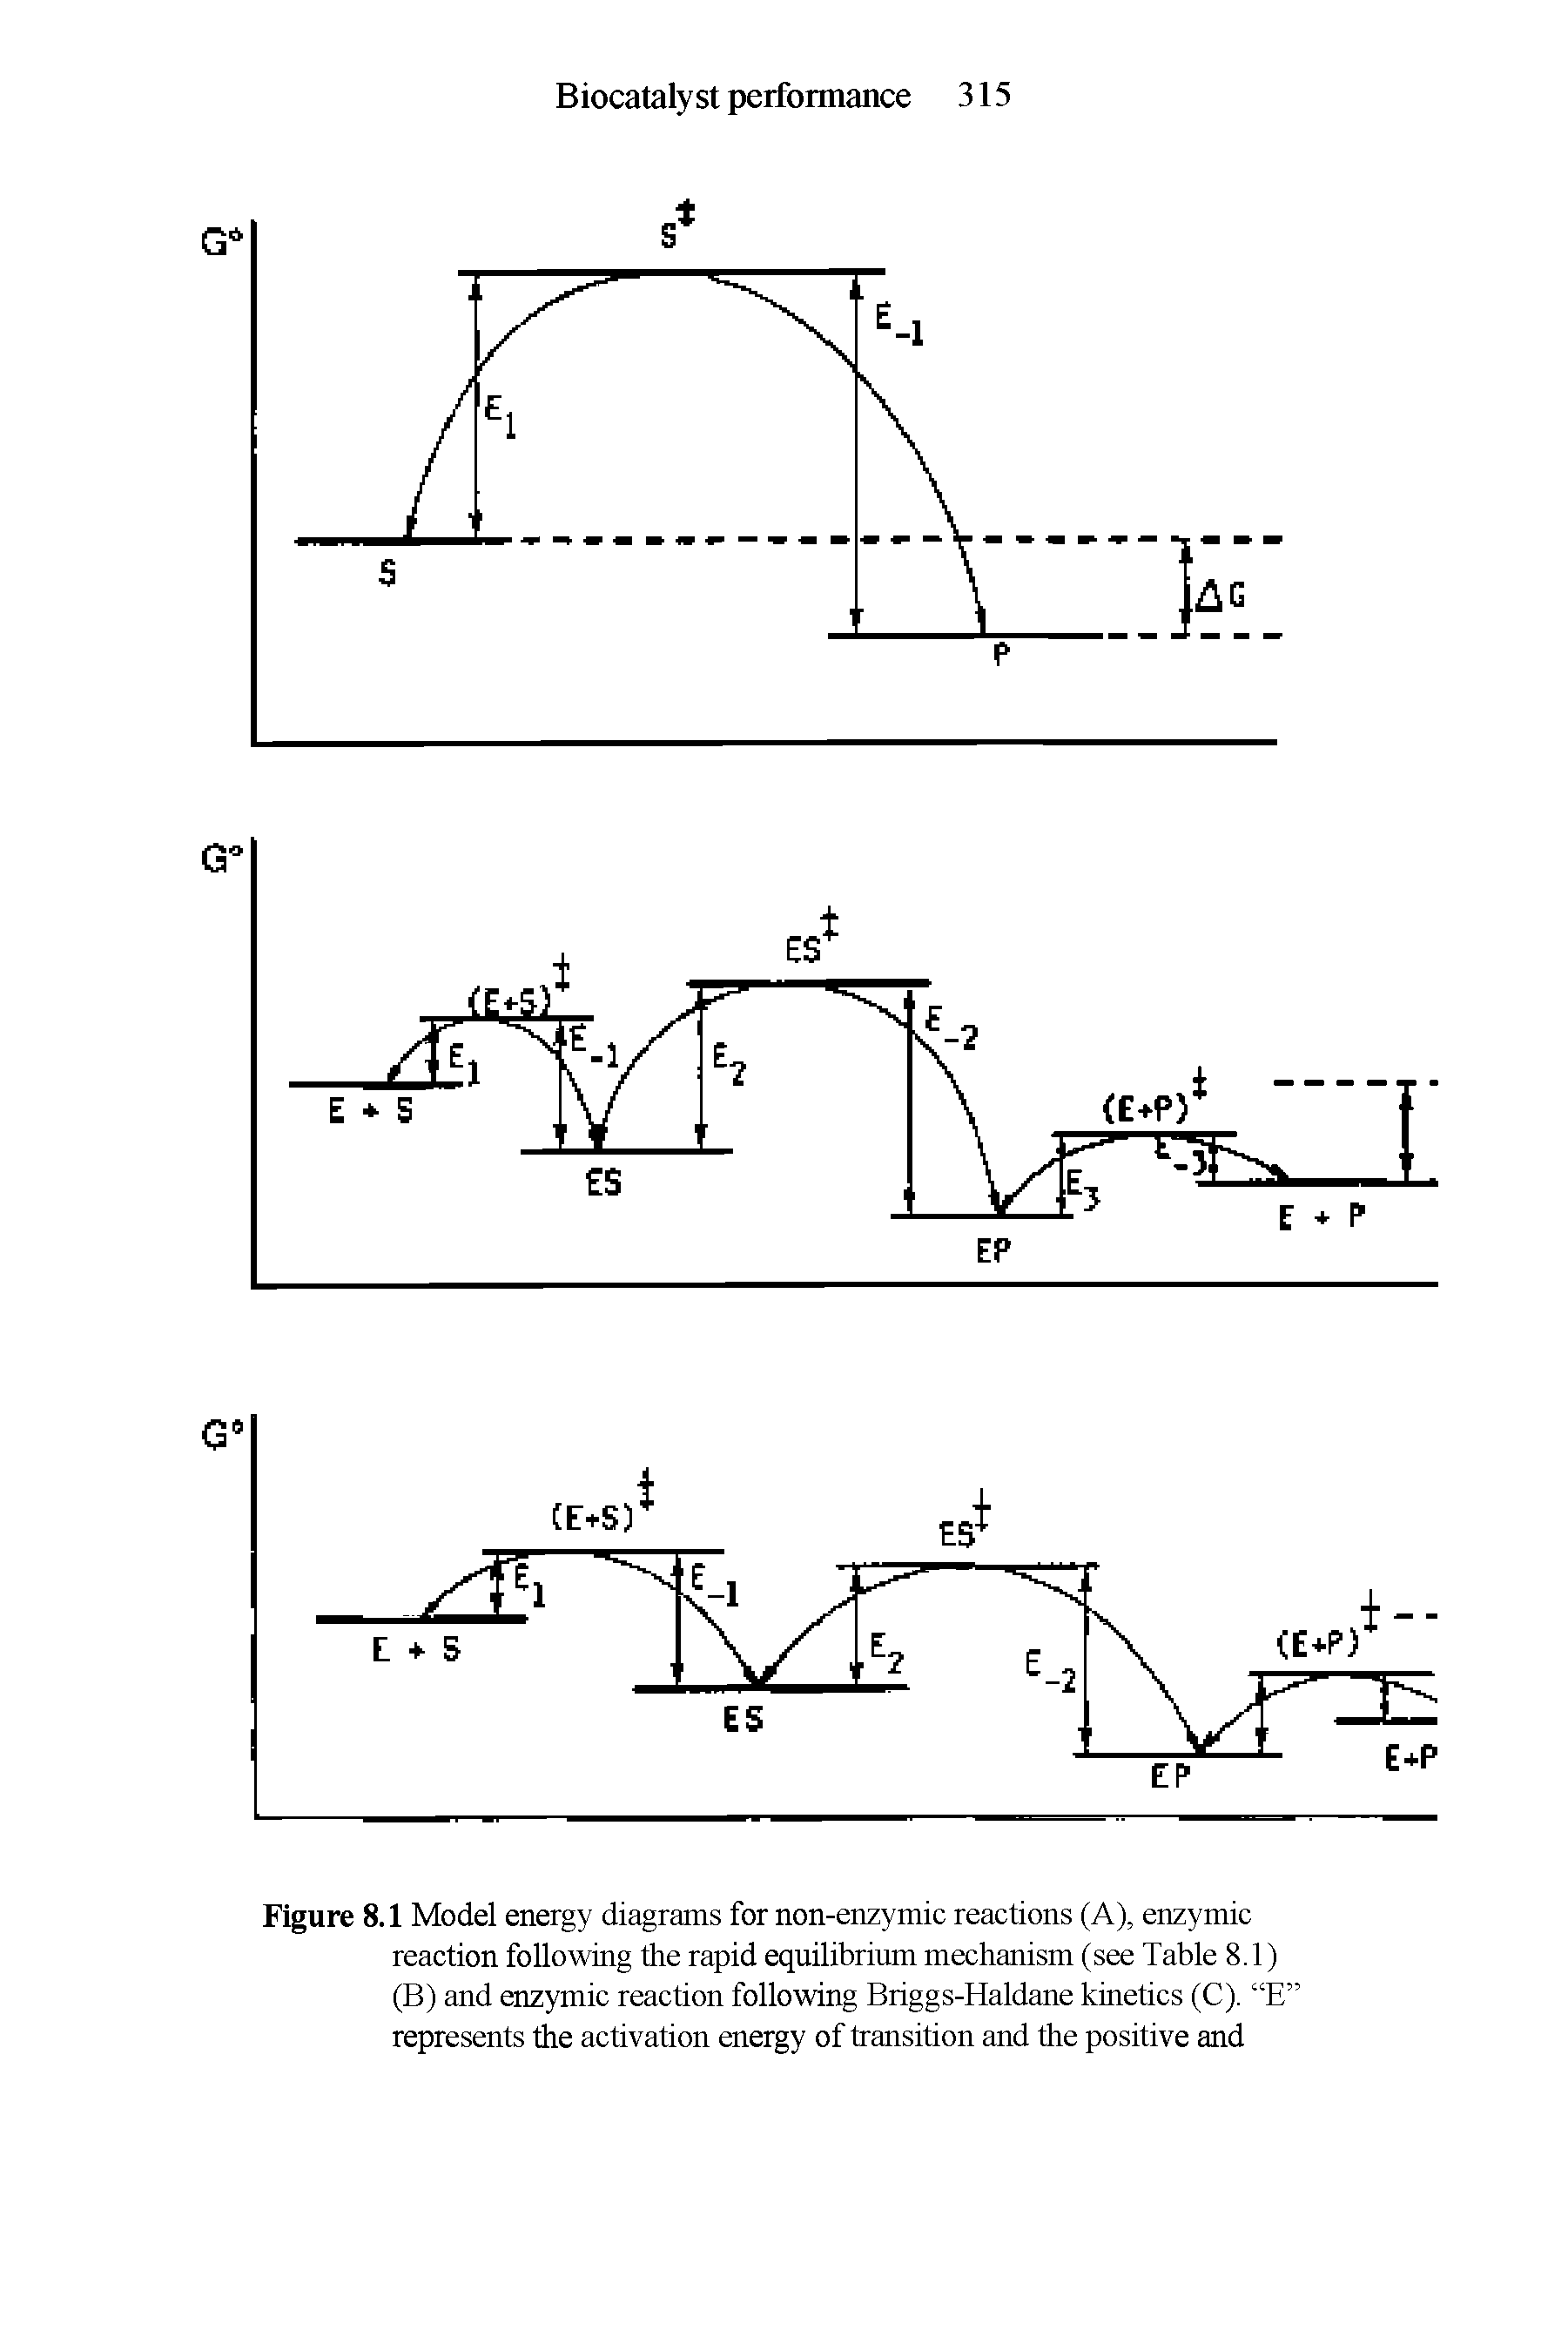 Figure 8.1 Model energy diagrams for non-enzymic reactions (A), enzymic reaction following the rapid equilibrium mechanism (see Table 8.1) (B) and enzymic reaction following Briggs-Haldane kinetics (C). E represents the activation energy of transition and the positive and...